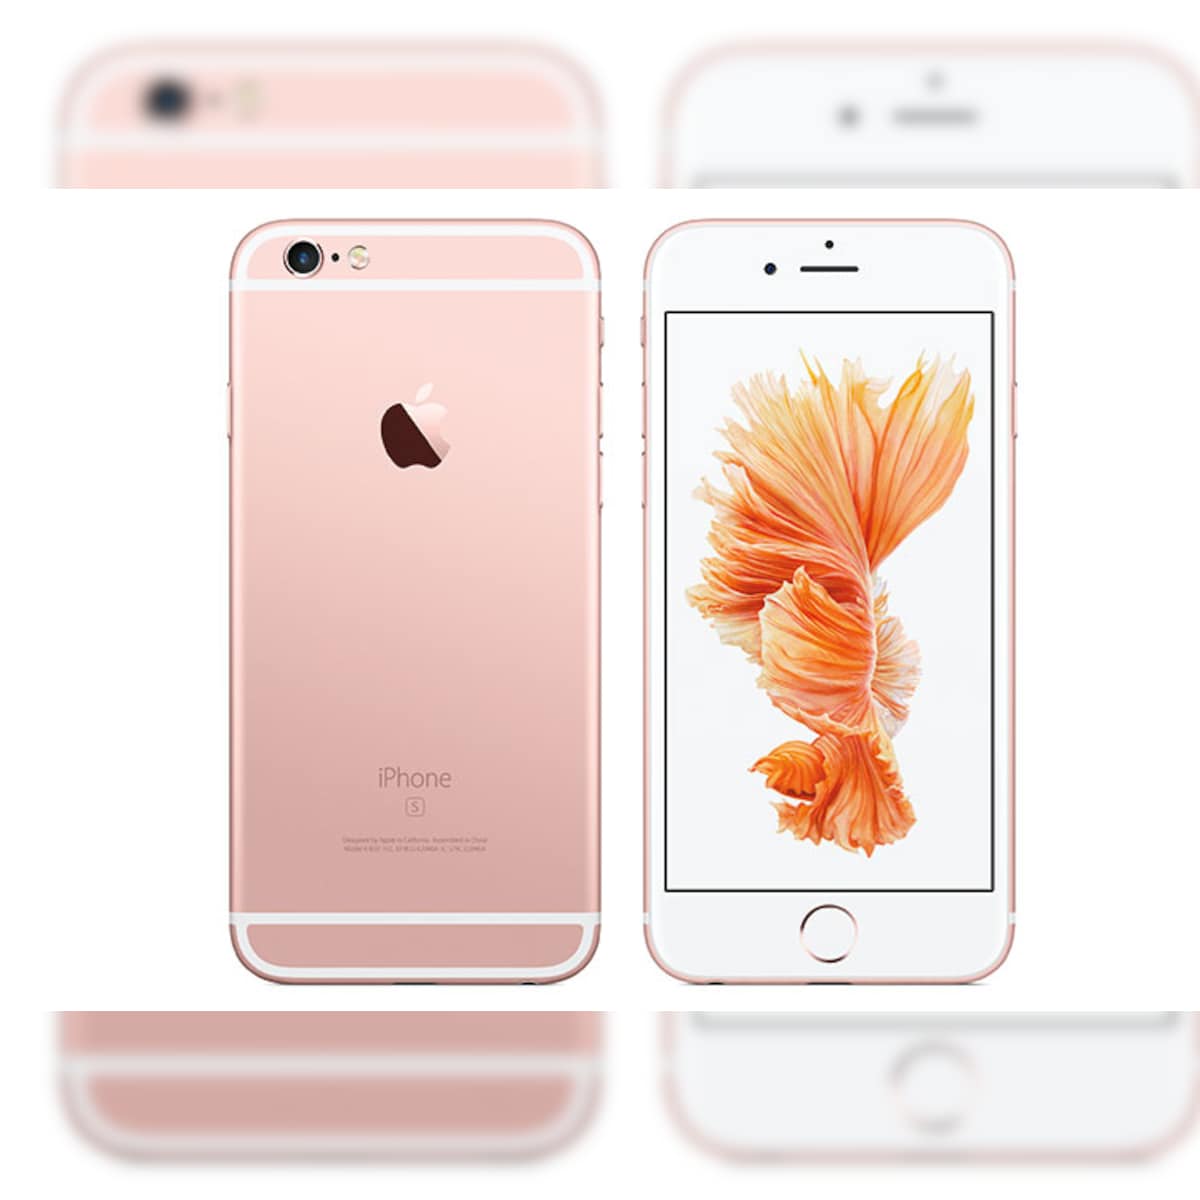 Instrument Expliciet operator Apple iPhone 6s, iPhone 6s Plus: 5 things new in the latest iPhones